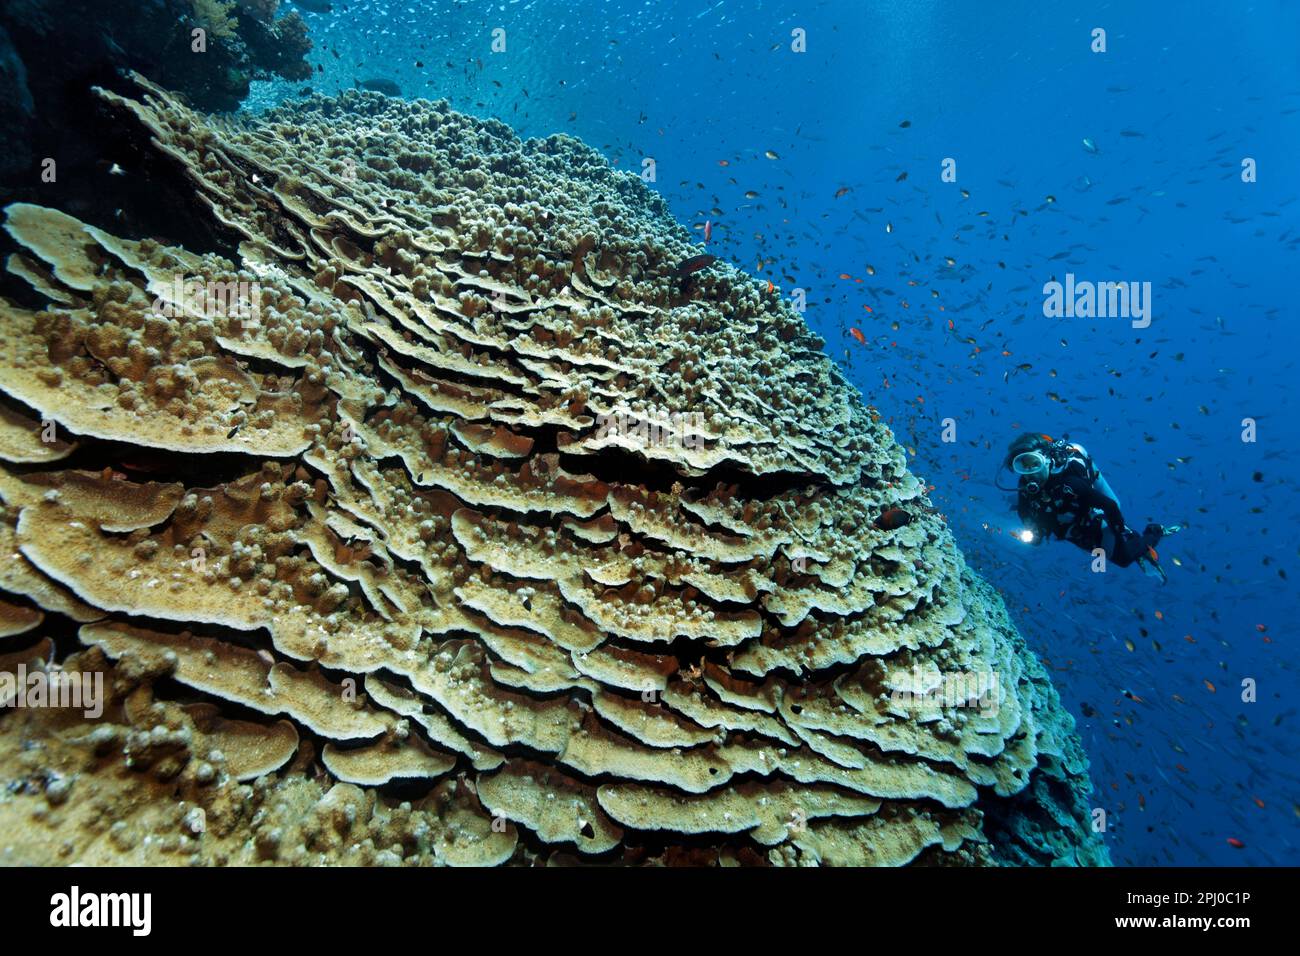 Diver looking at Acropora coral (Acropora danai), very large, huge, on coral reef wall, Red Sea, Daedalus Reef, Marsa Alam, Egypt Stock Photo